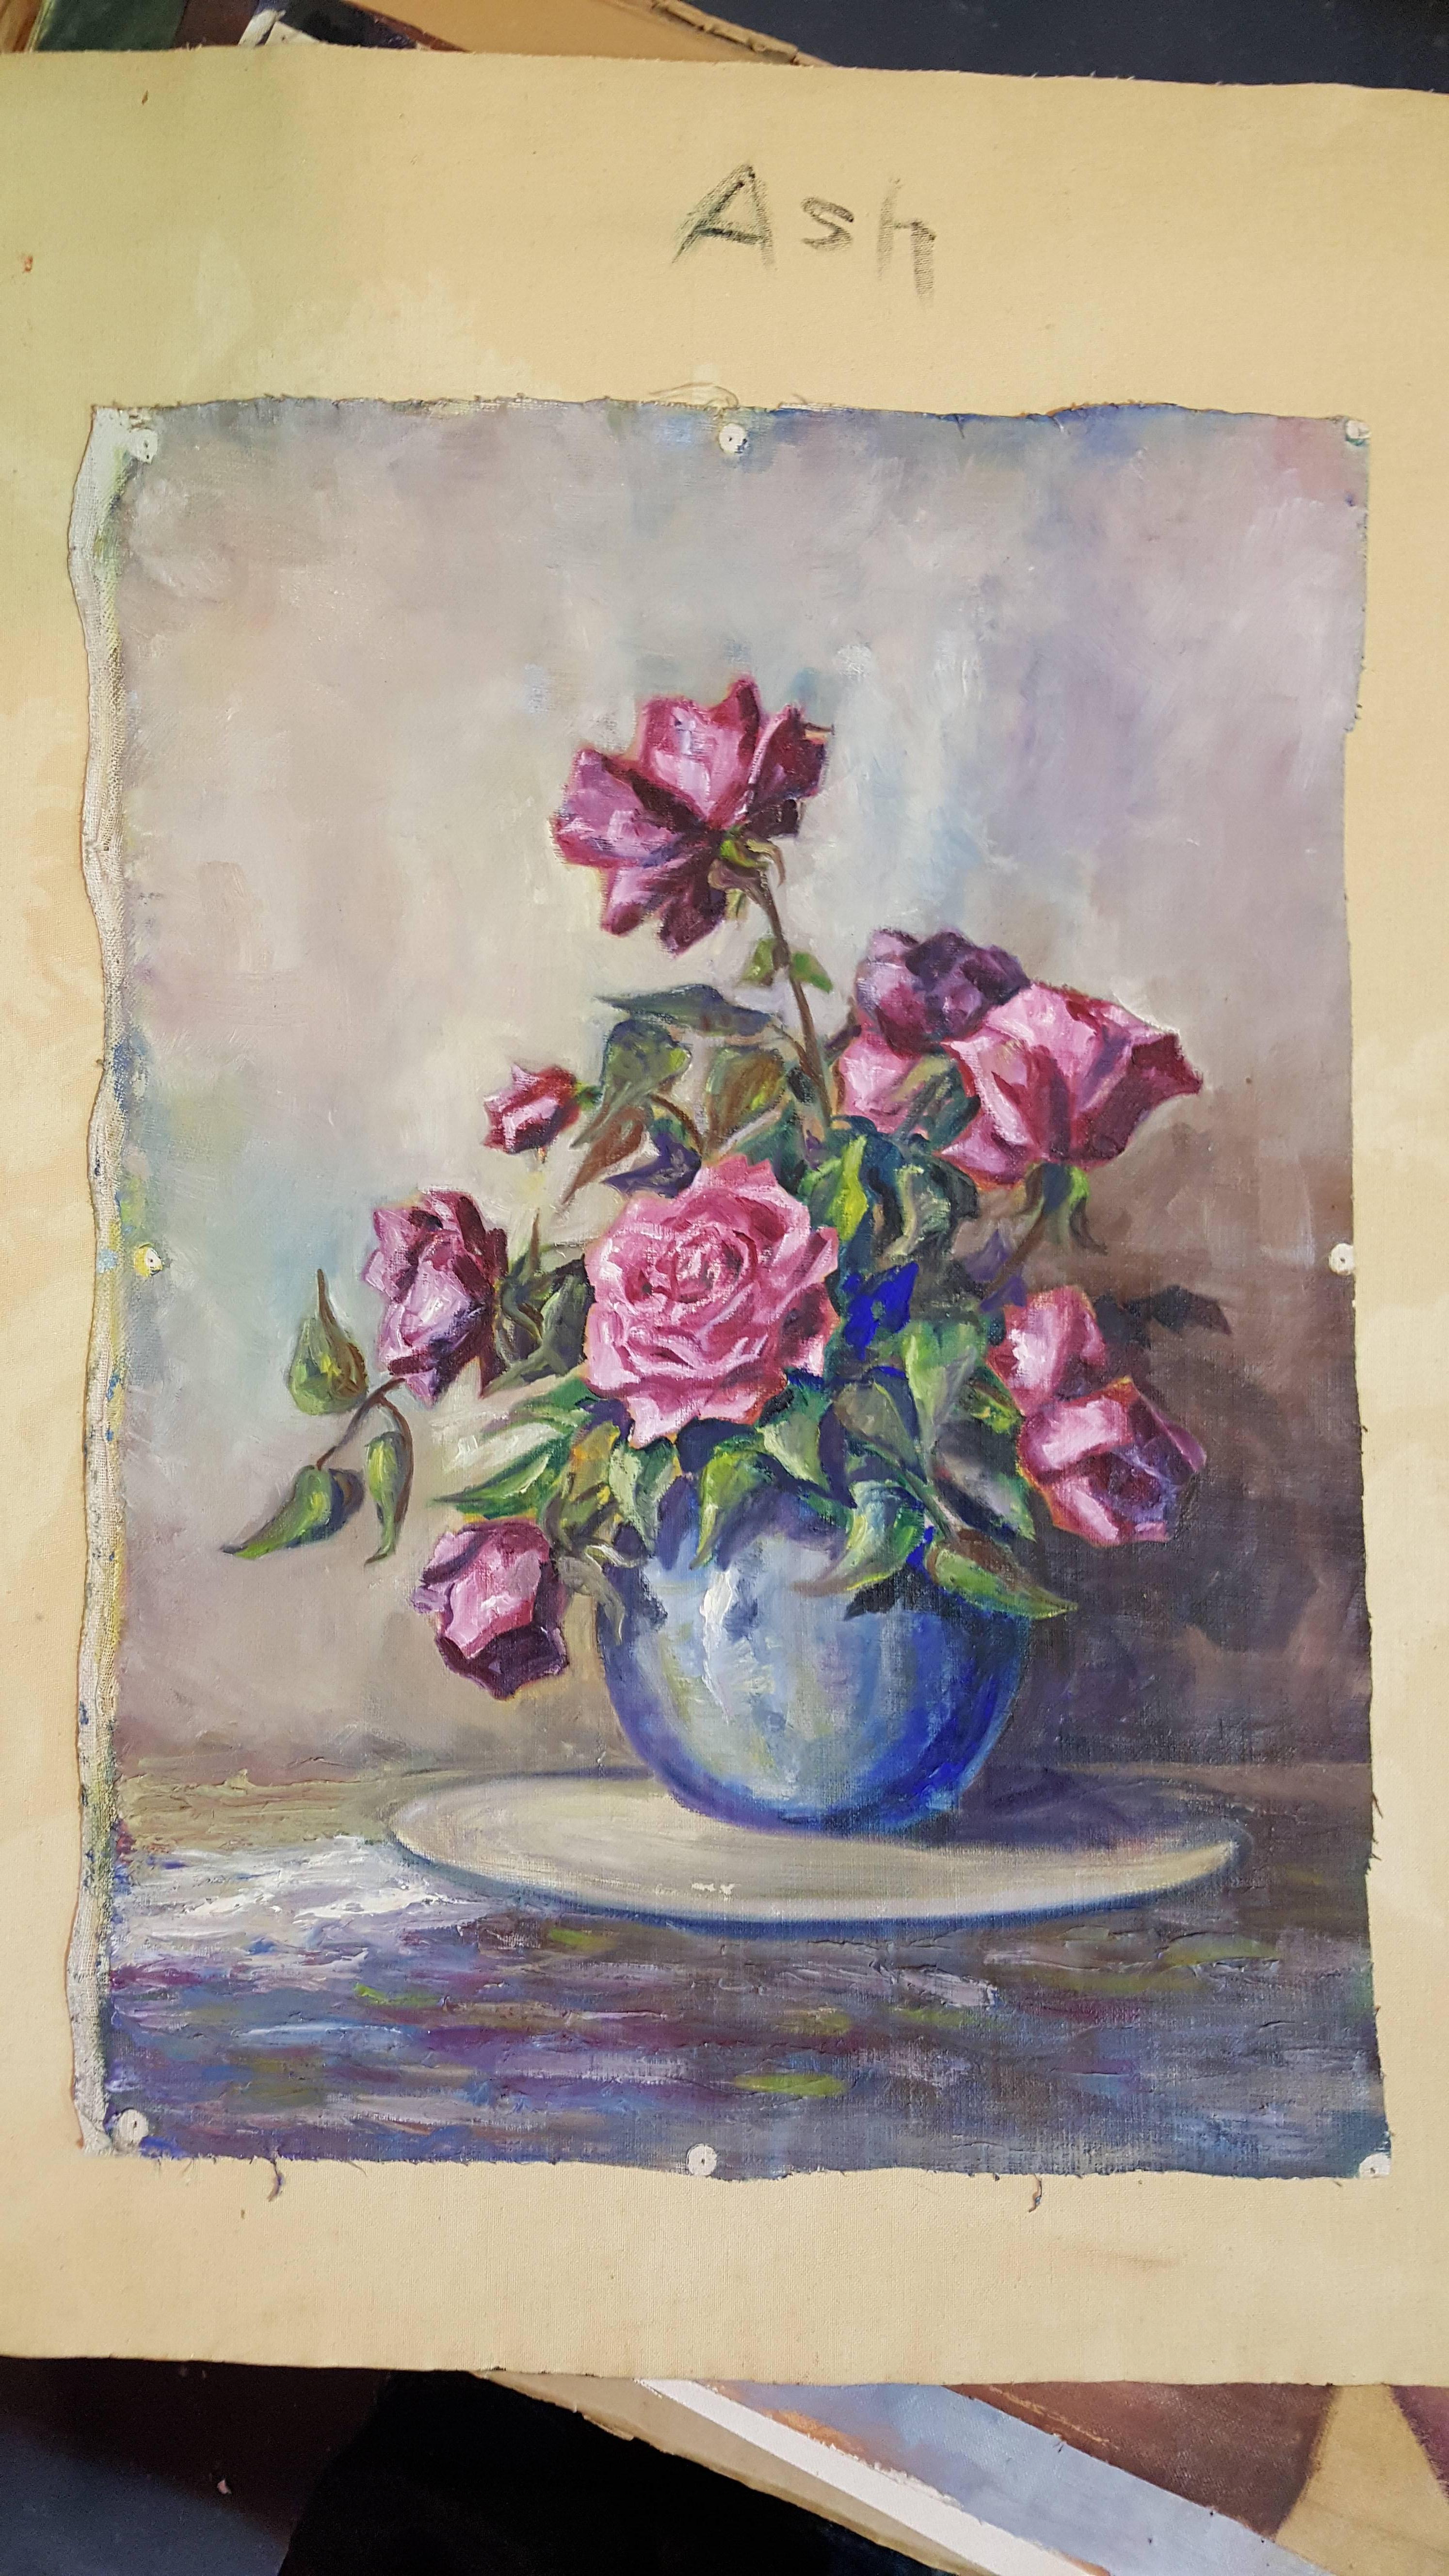 1950s oil on canvas still life painting of roses in a vase. Painted by San Francisco Bay Area artist, Beatrice Ash. Born in California on July 13, 1900. Beatrice married Elbert Ash and settled in Alameda, CA in 1940. She died there on May 23, 1968.